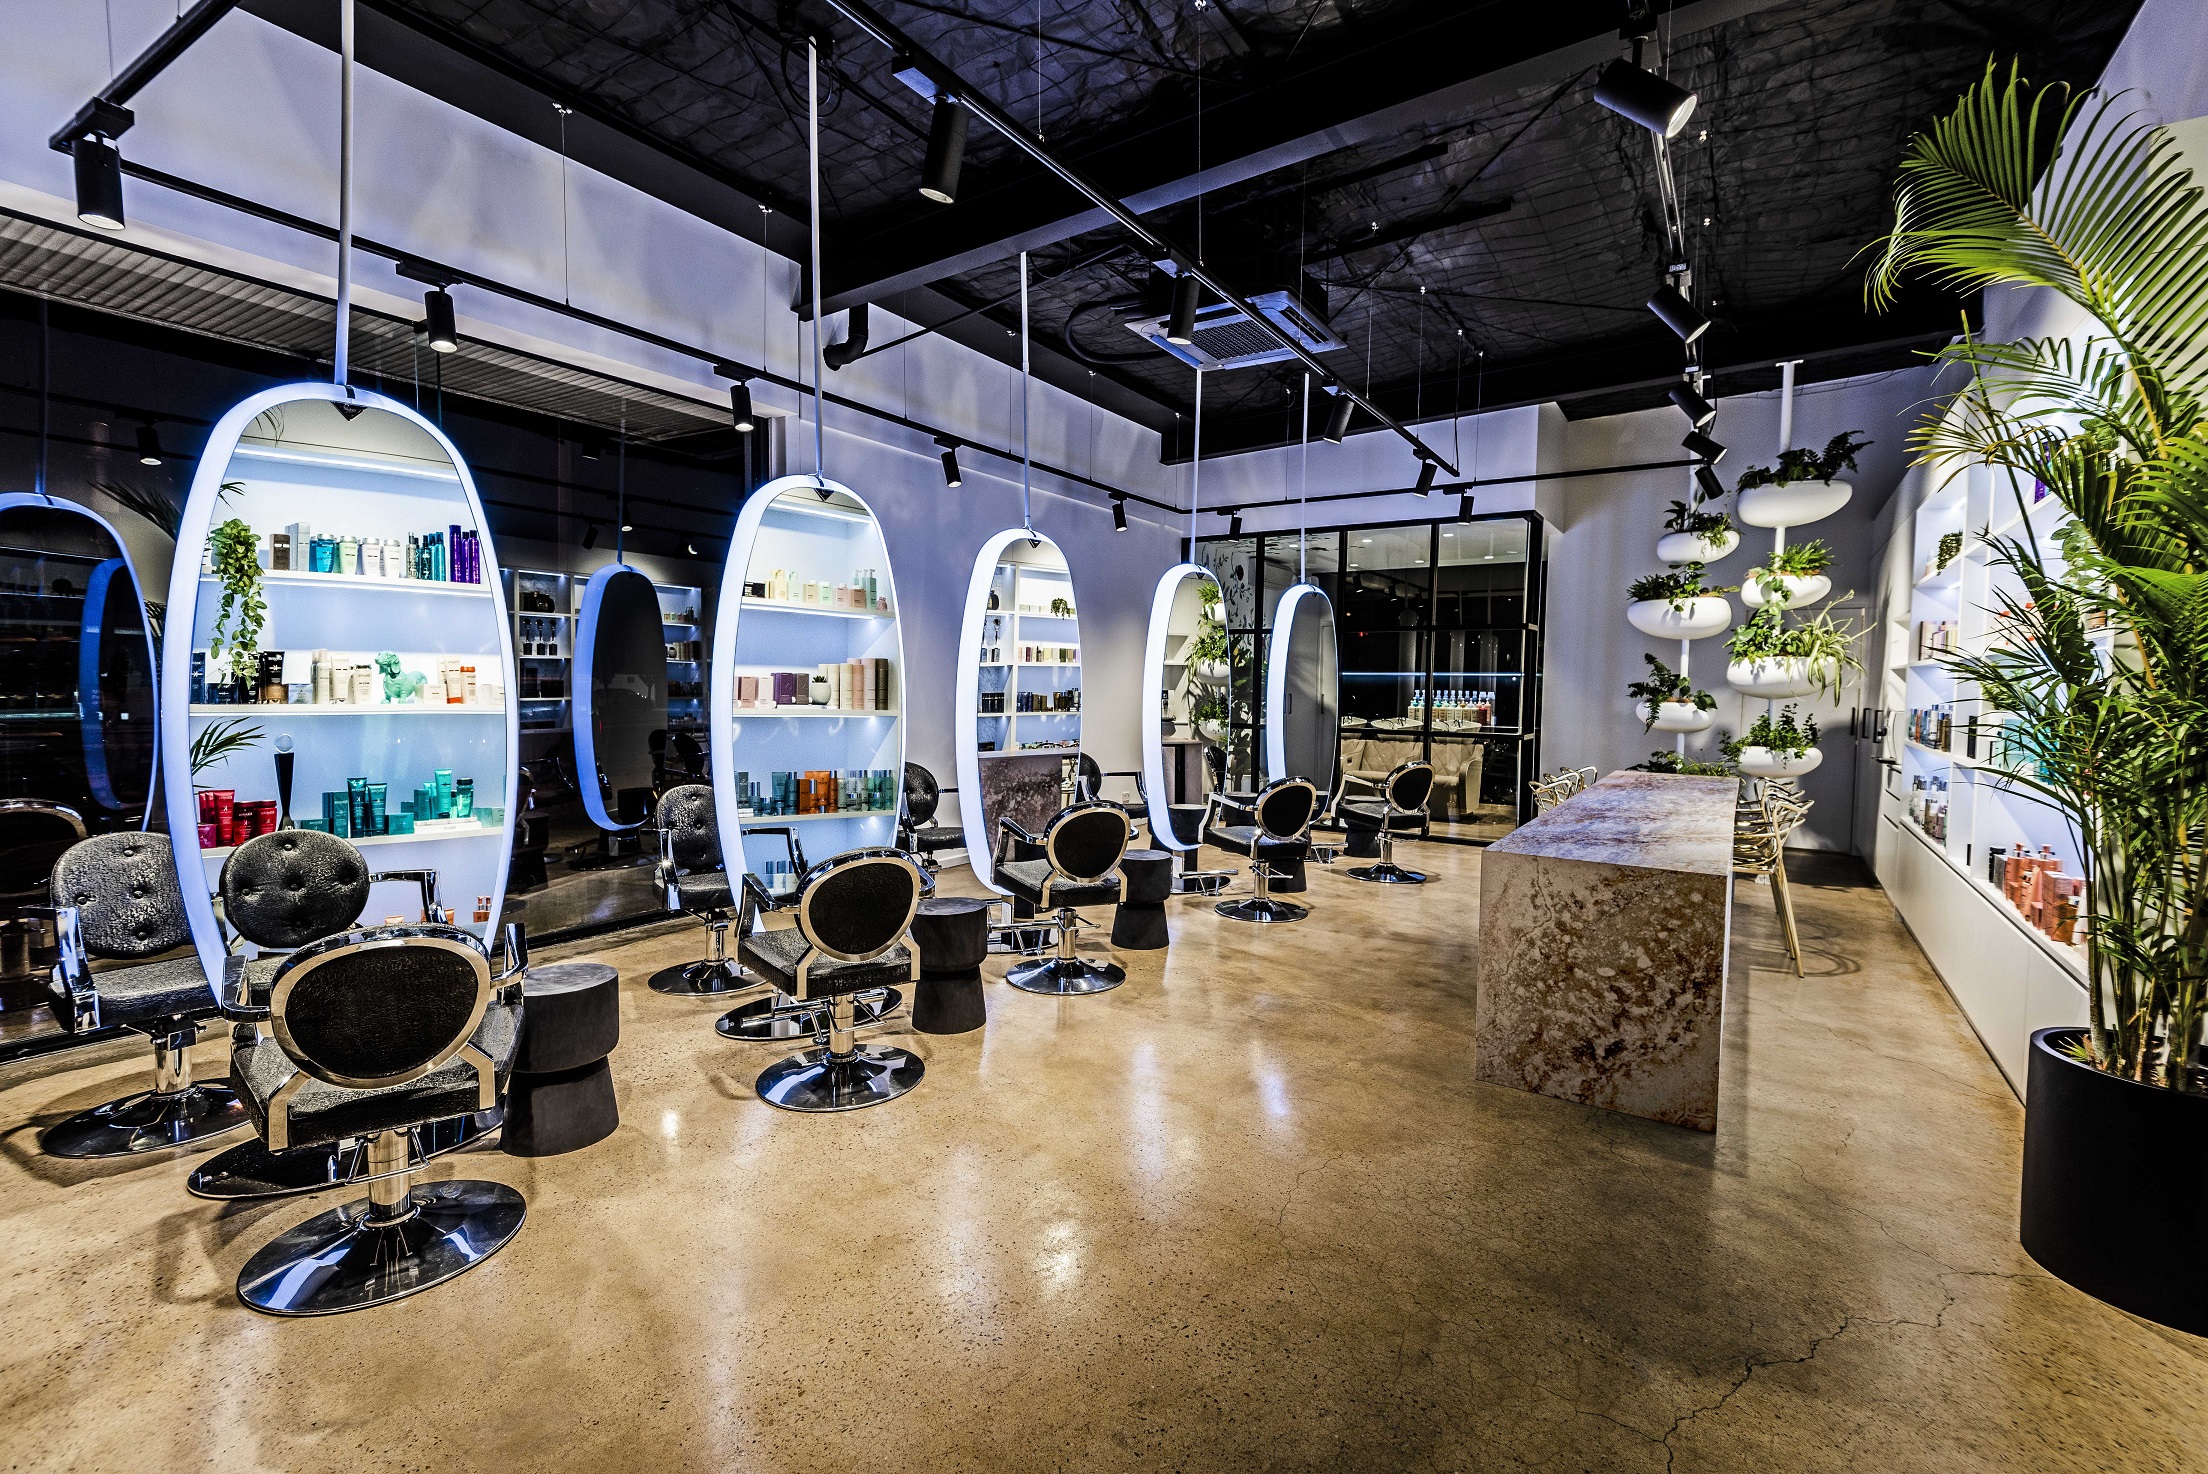 See the 2019 Hair Expo Best Salon Design Images - Styleicons